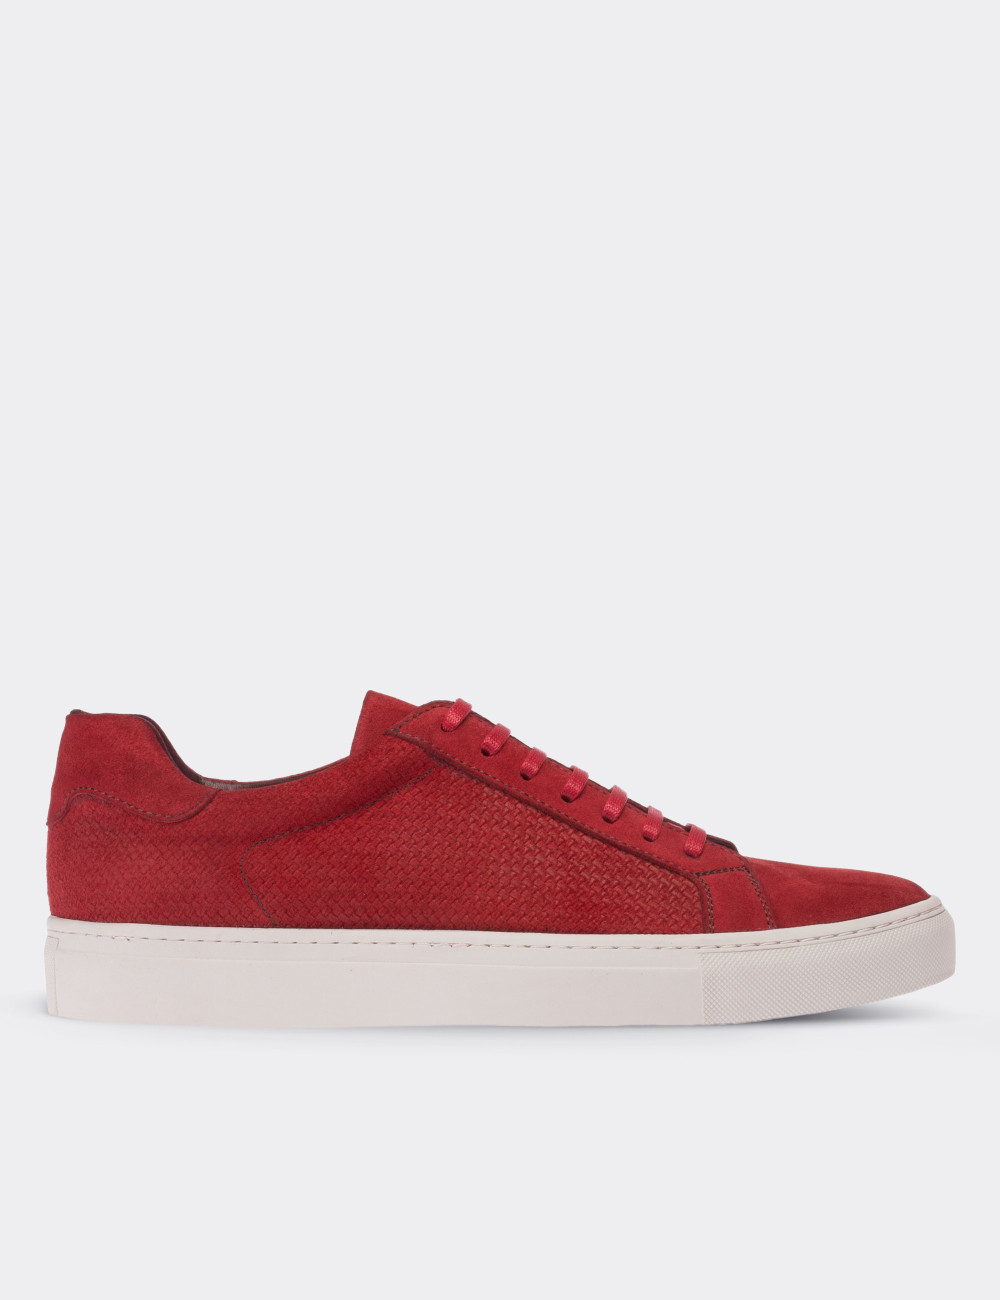 Red Suede Leather Sneakers - 01681MKRMC01